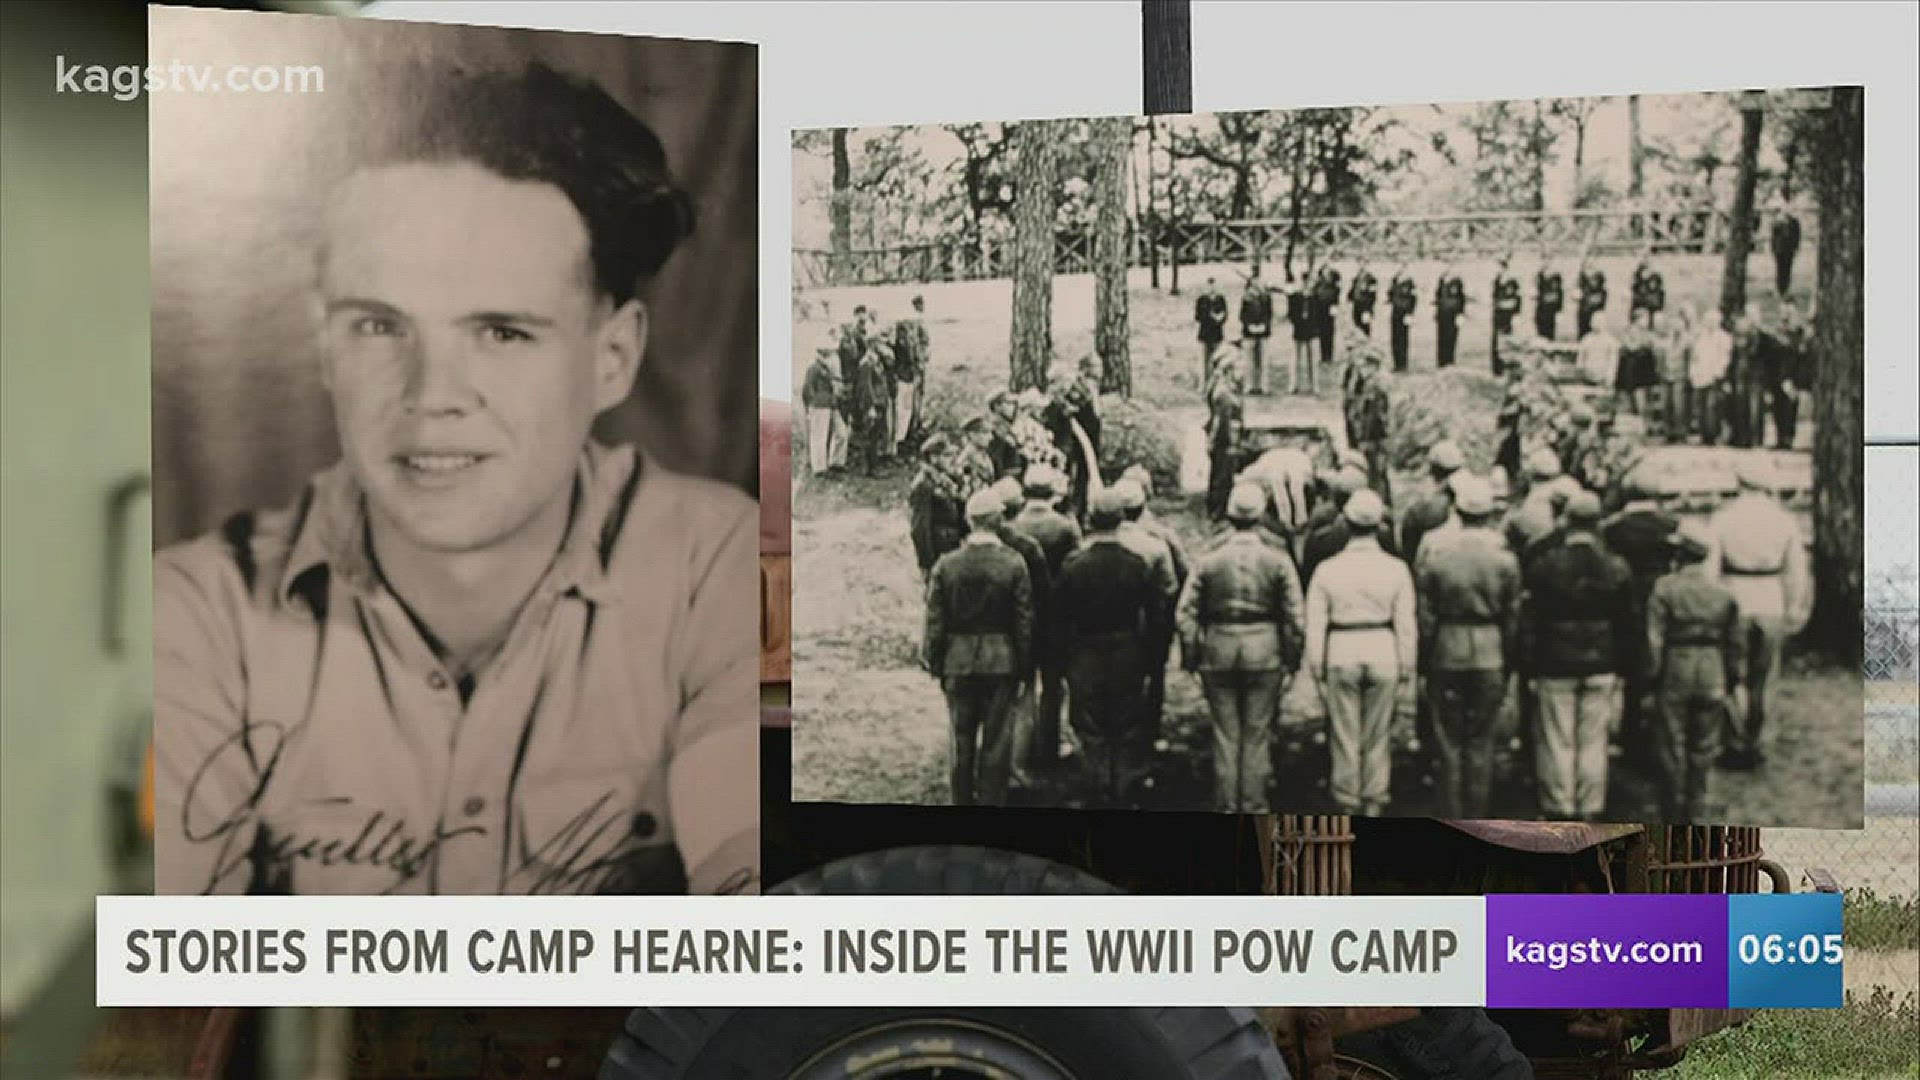 Deep in the heart of Texas rests a hidden historical gem: A WWII POW camp located in Hearne, TX. KAGS own Jay O'Brien paid a visit to the camp to tell the story of a landmark that has almost faded into history.